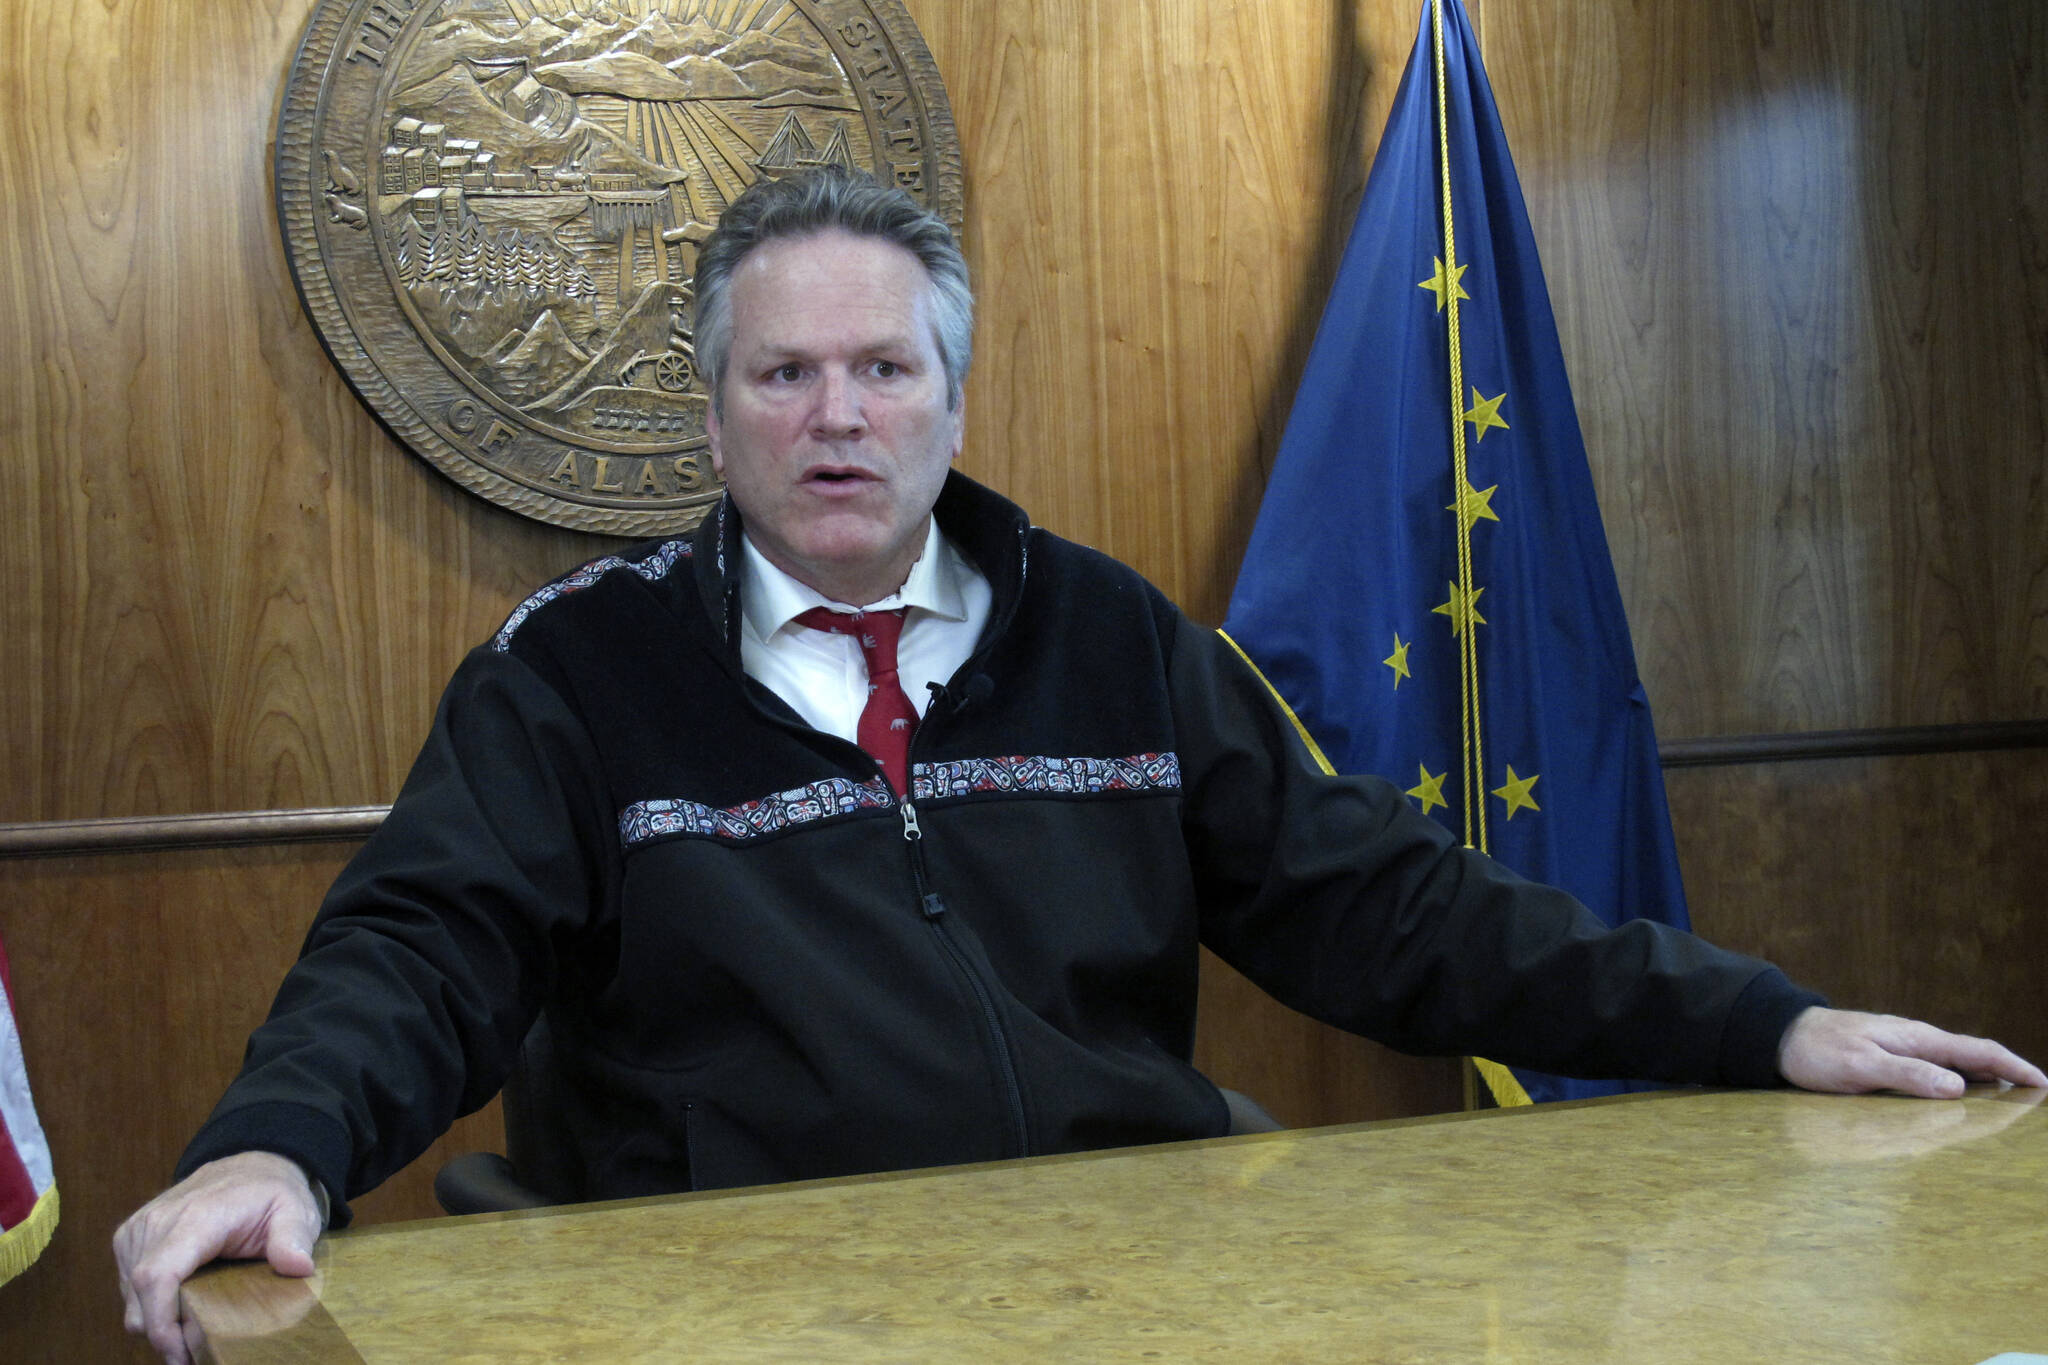 Gov. Mike Dunleavy speaks with reporters during a news briefing on Tuesday, Sept. 14, 2021, in Juneau, Alaska. Dunleavy said he doesn't see his acceptance of former President Donald Trump's endorsement as hurting his relationship with the state's senior U.S. senator, Republican Lisa Murkowski, who voted to convict Trump at his impeachment trial last year and whom Trump has vowed to fight in her reelection bid. (AP Photo / Becky Bohrer)